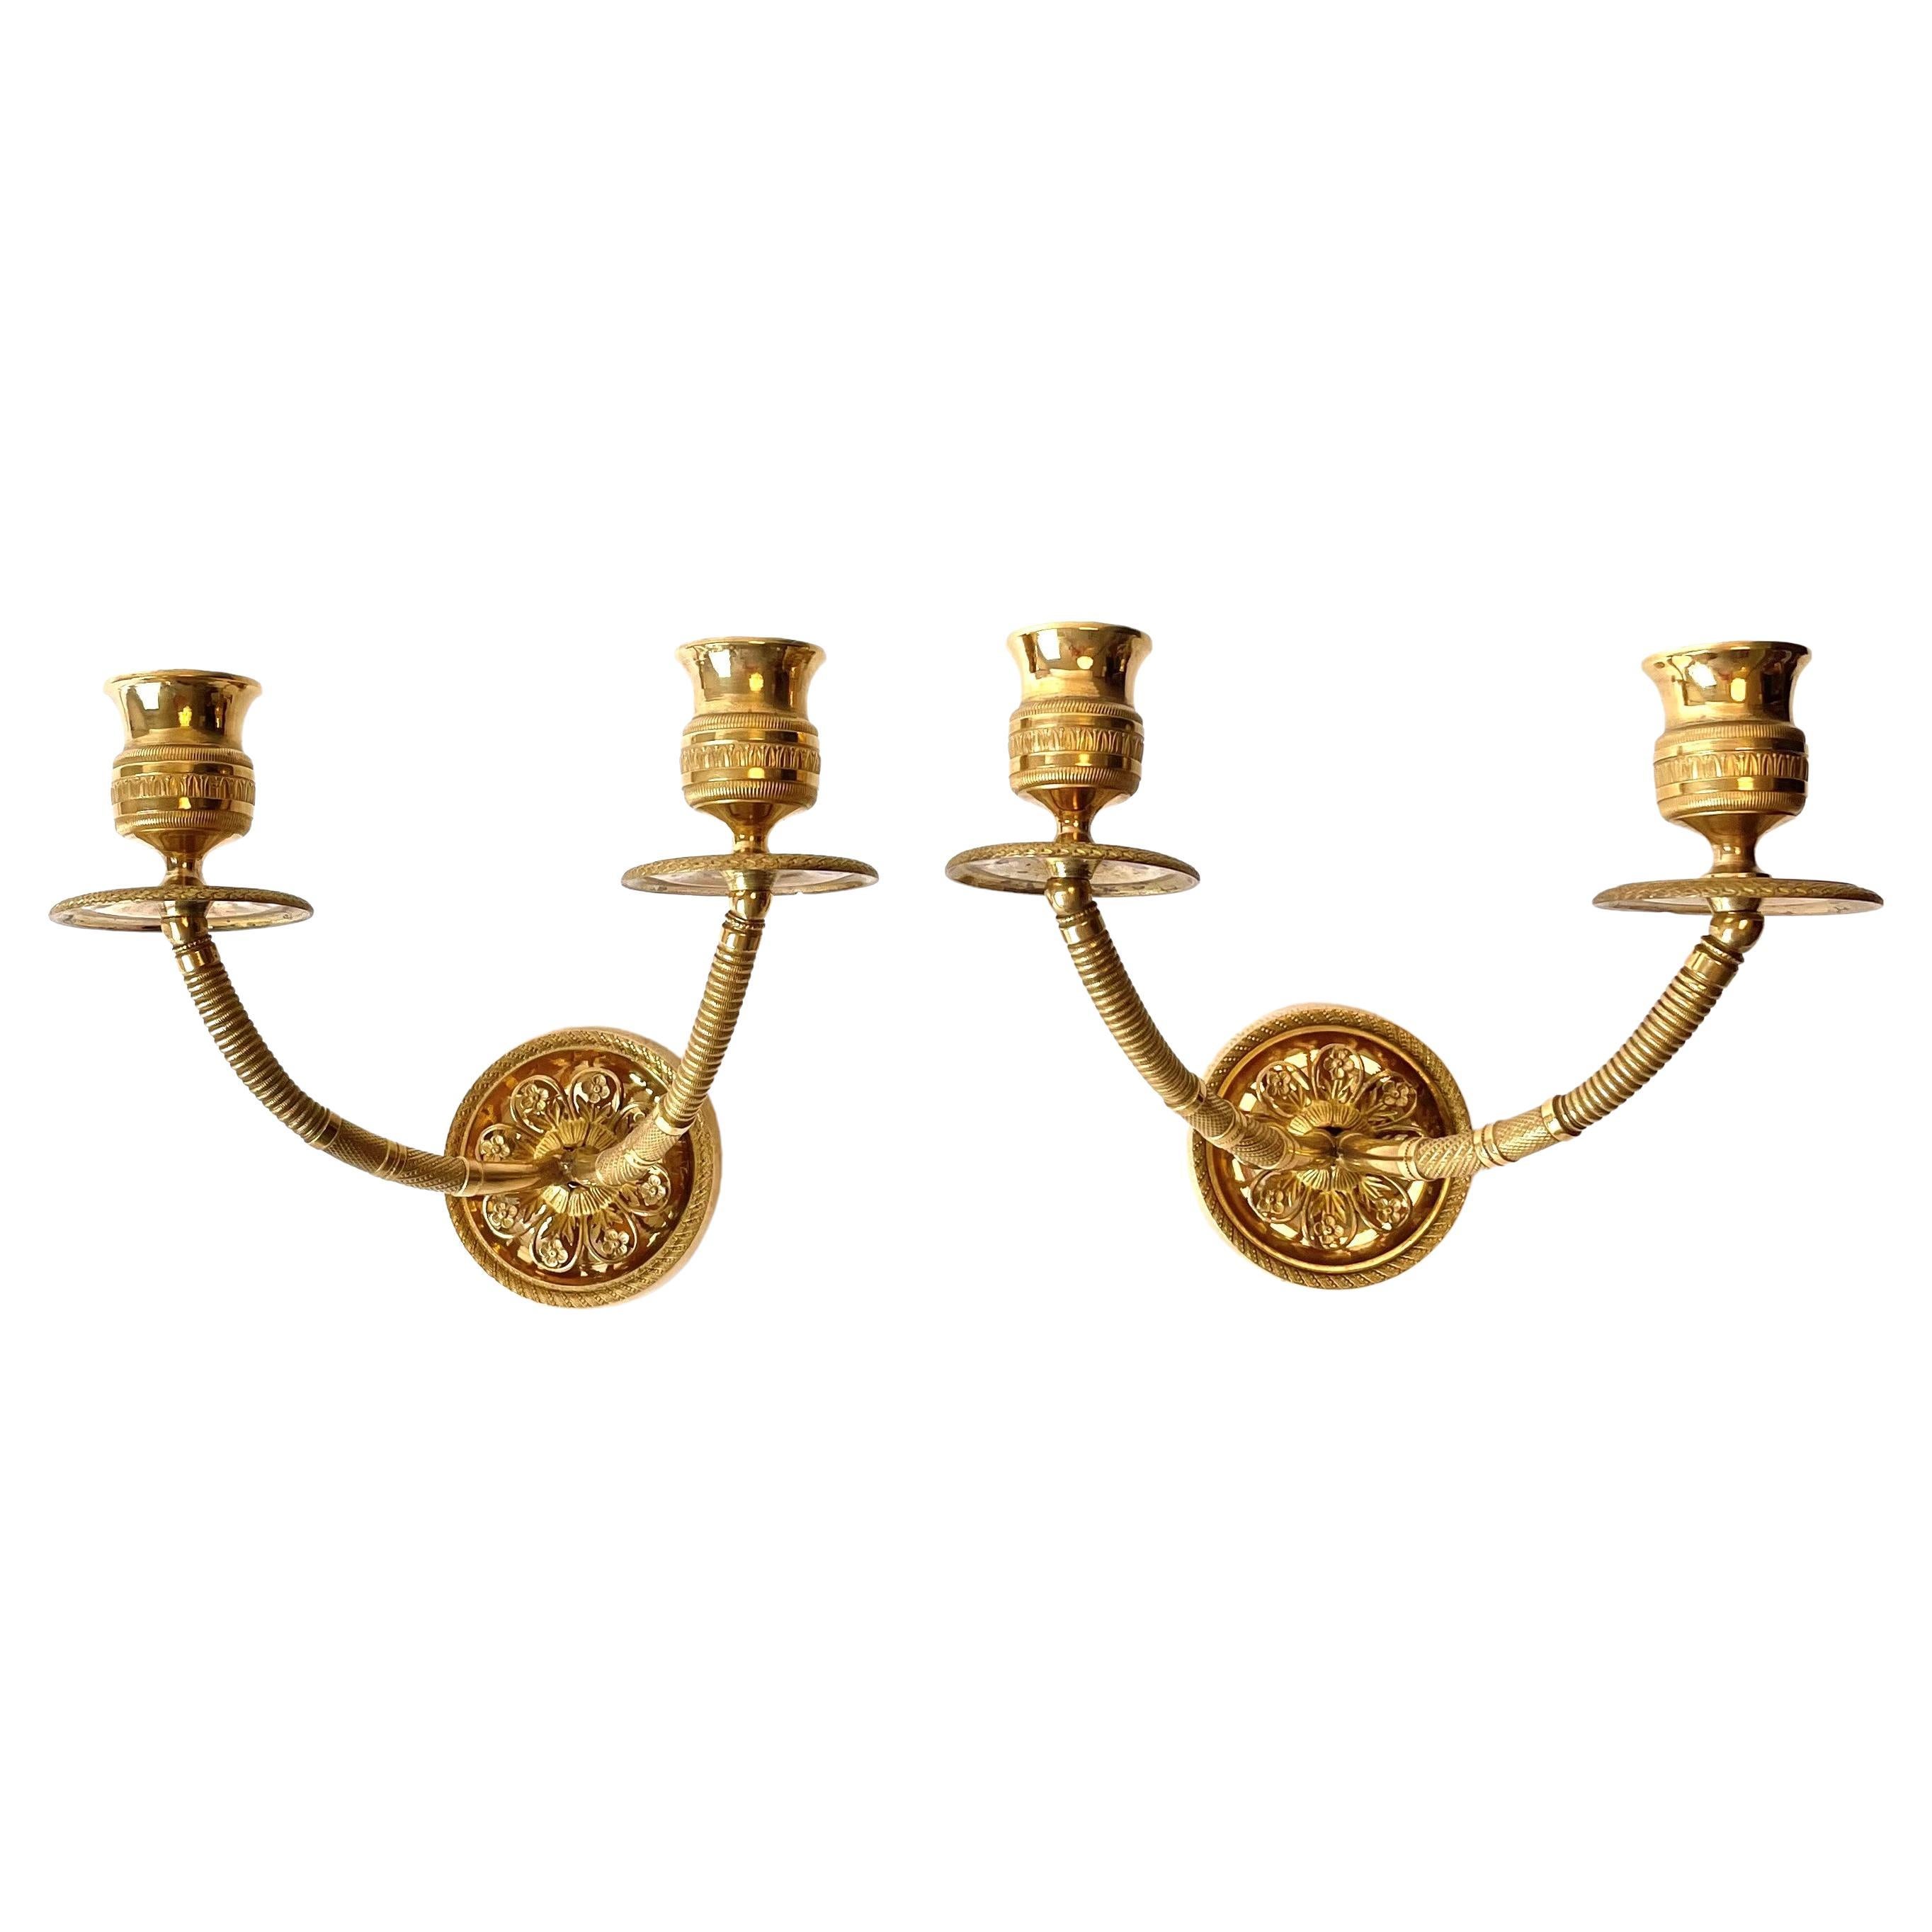 Elegant Pair of Empire Appliques in Gilt Bronze from Early 19th Century For Sale